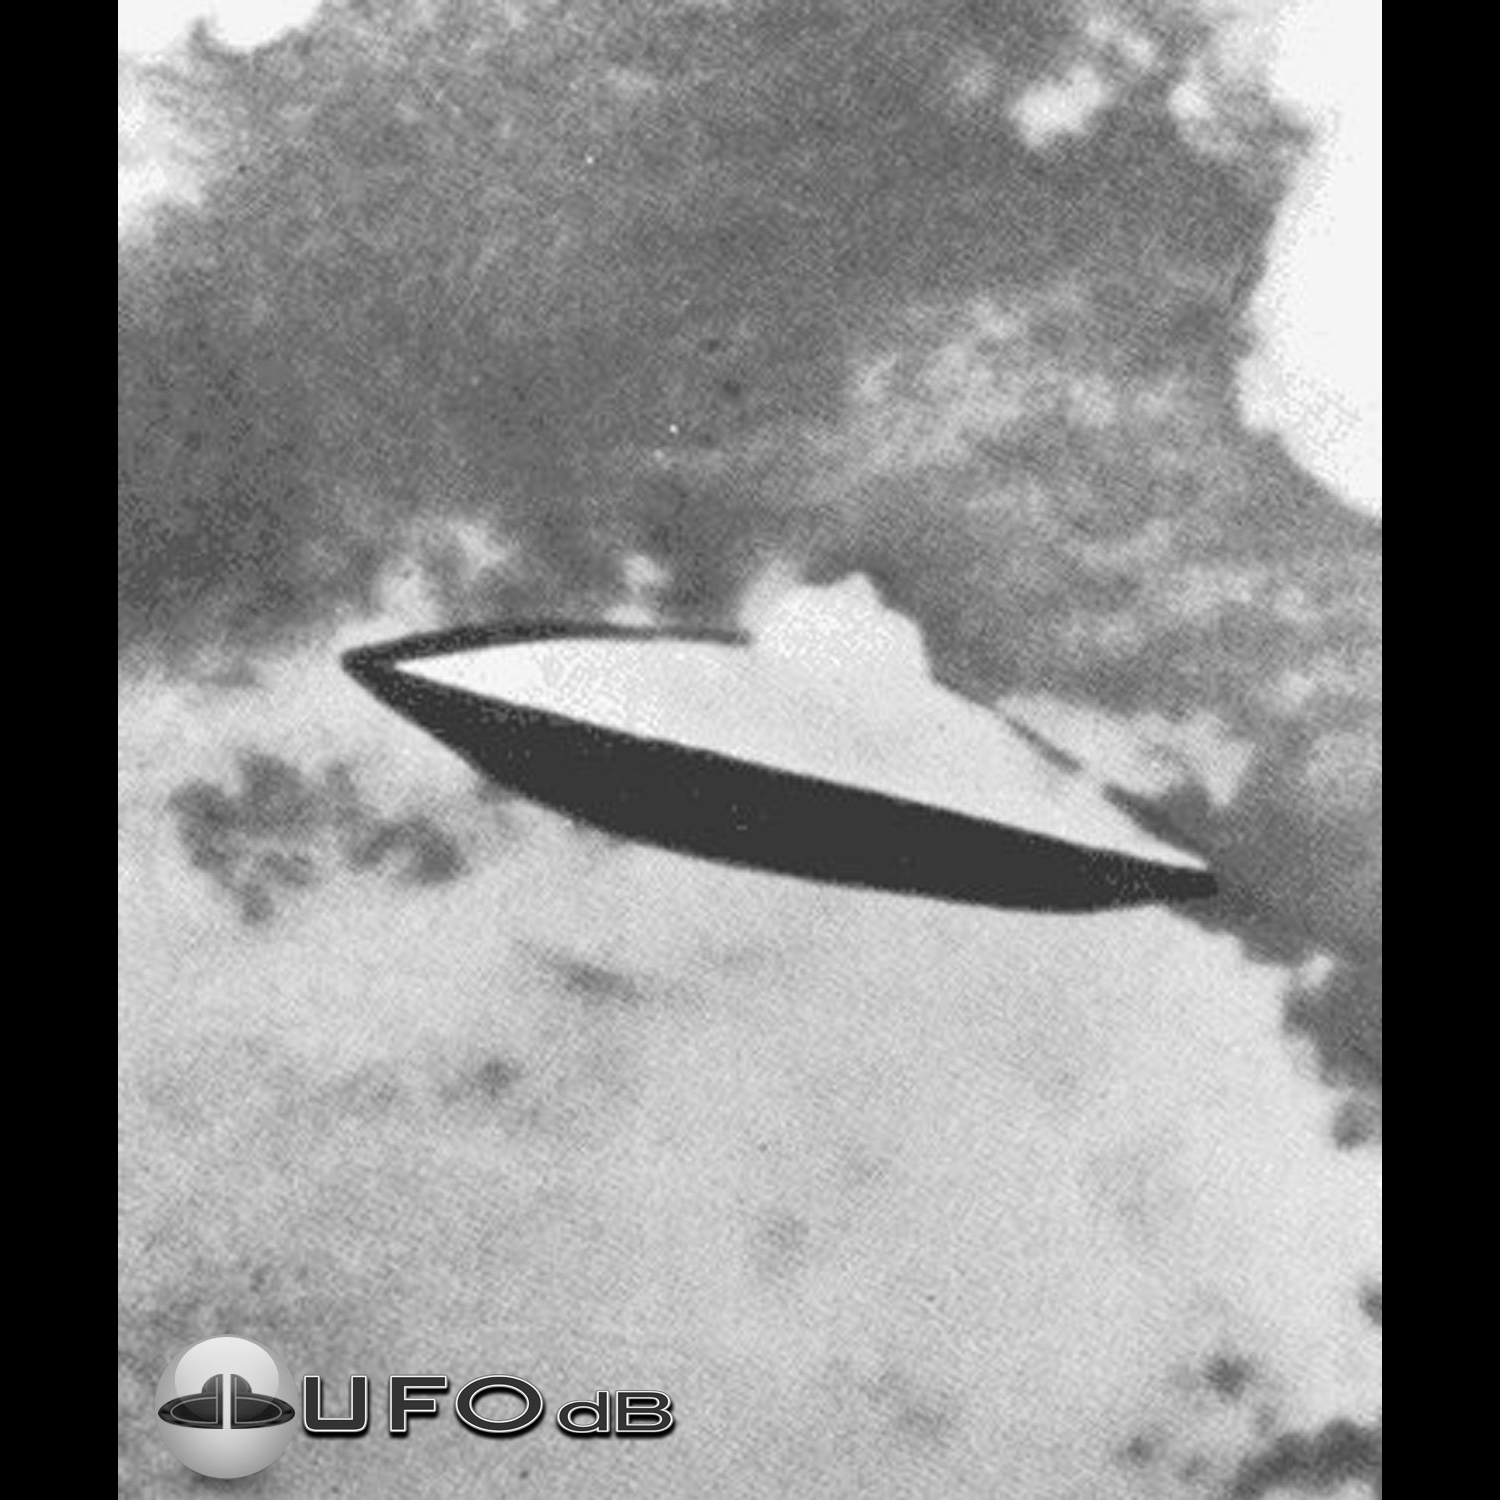 UFO picture taken by Air Pilot from US Marine group during Korean war UFO Picture #156-1